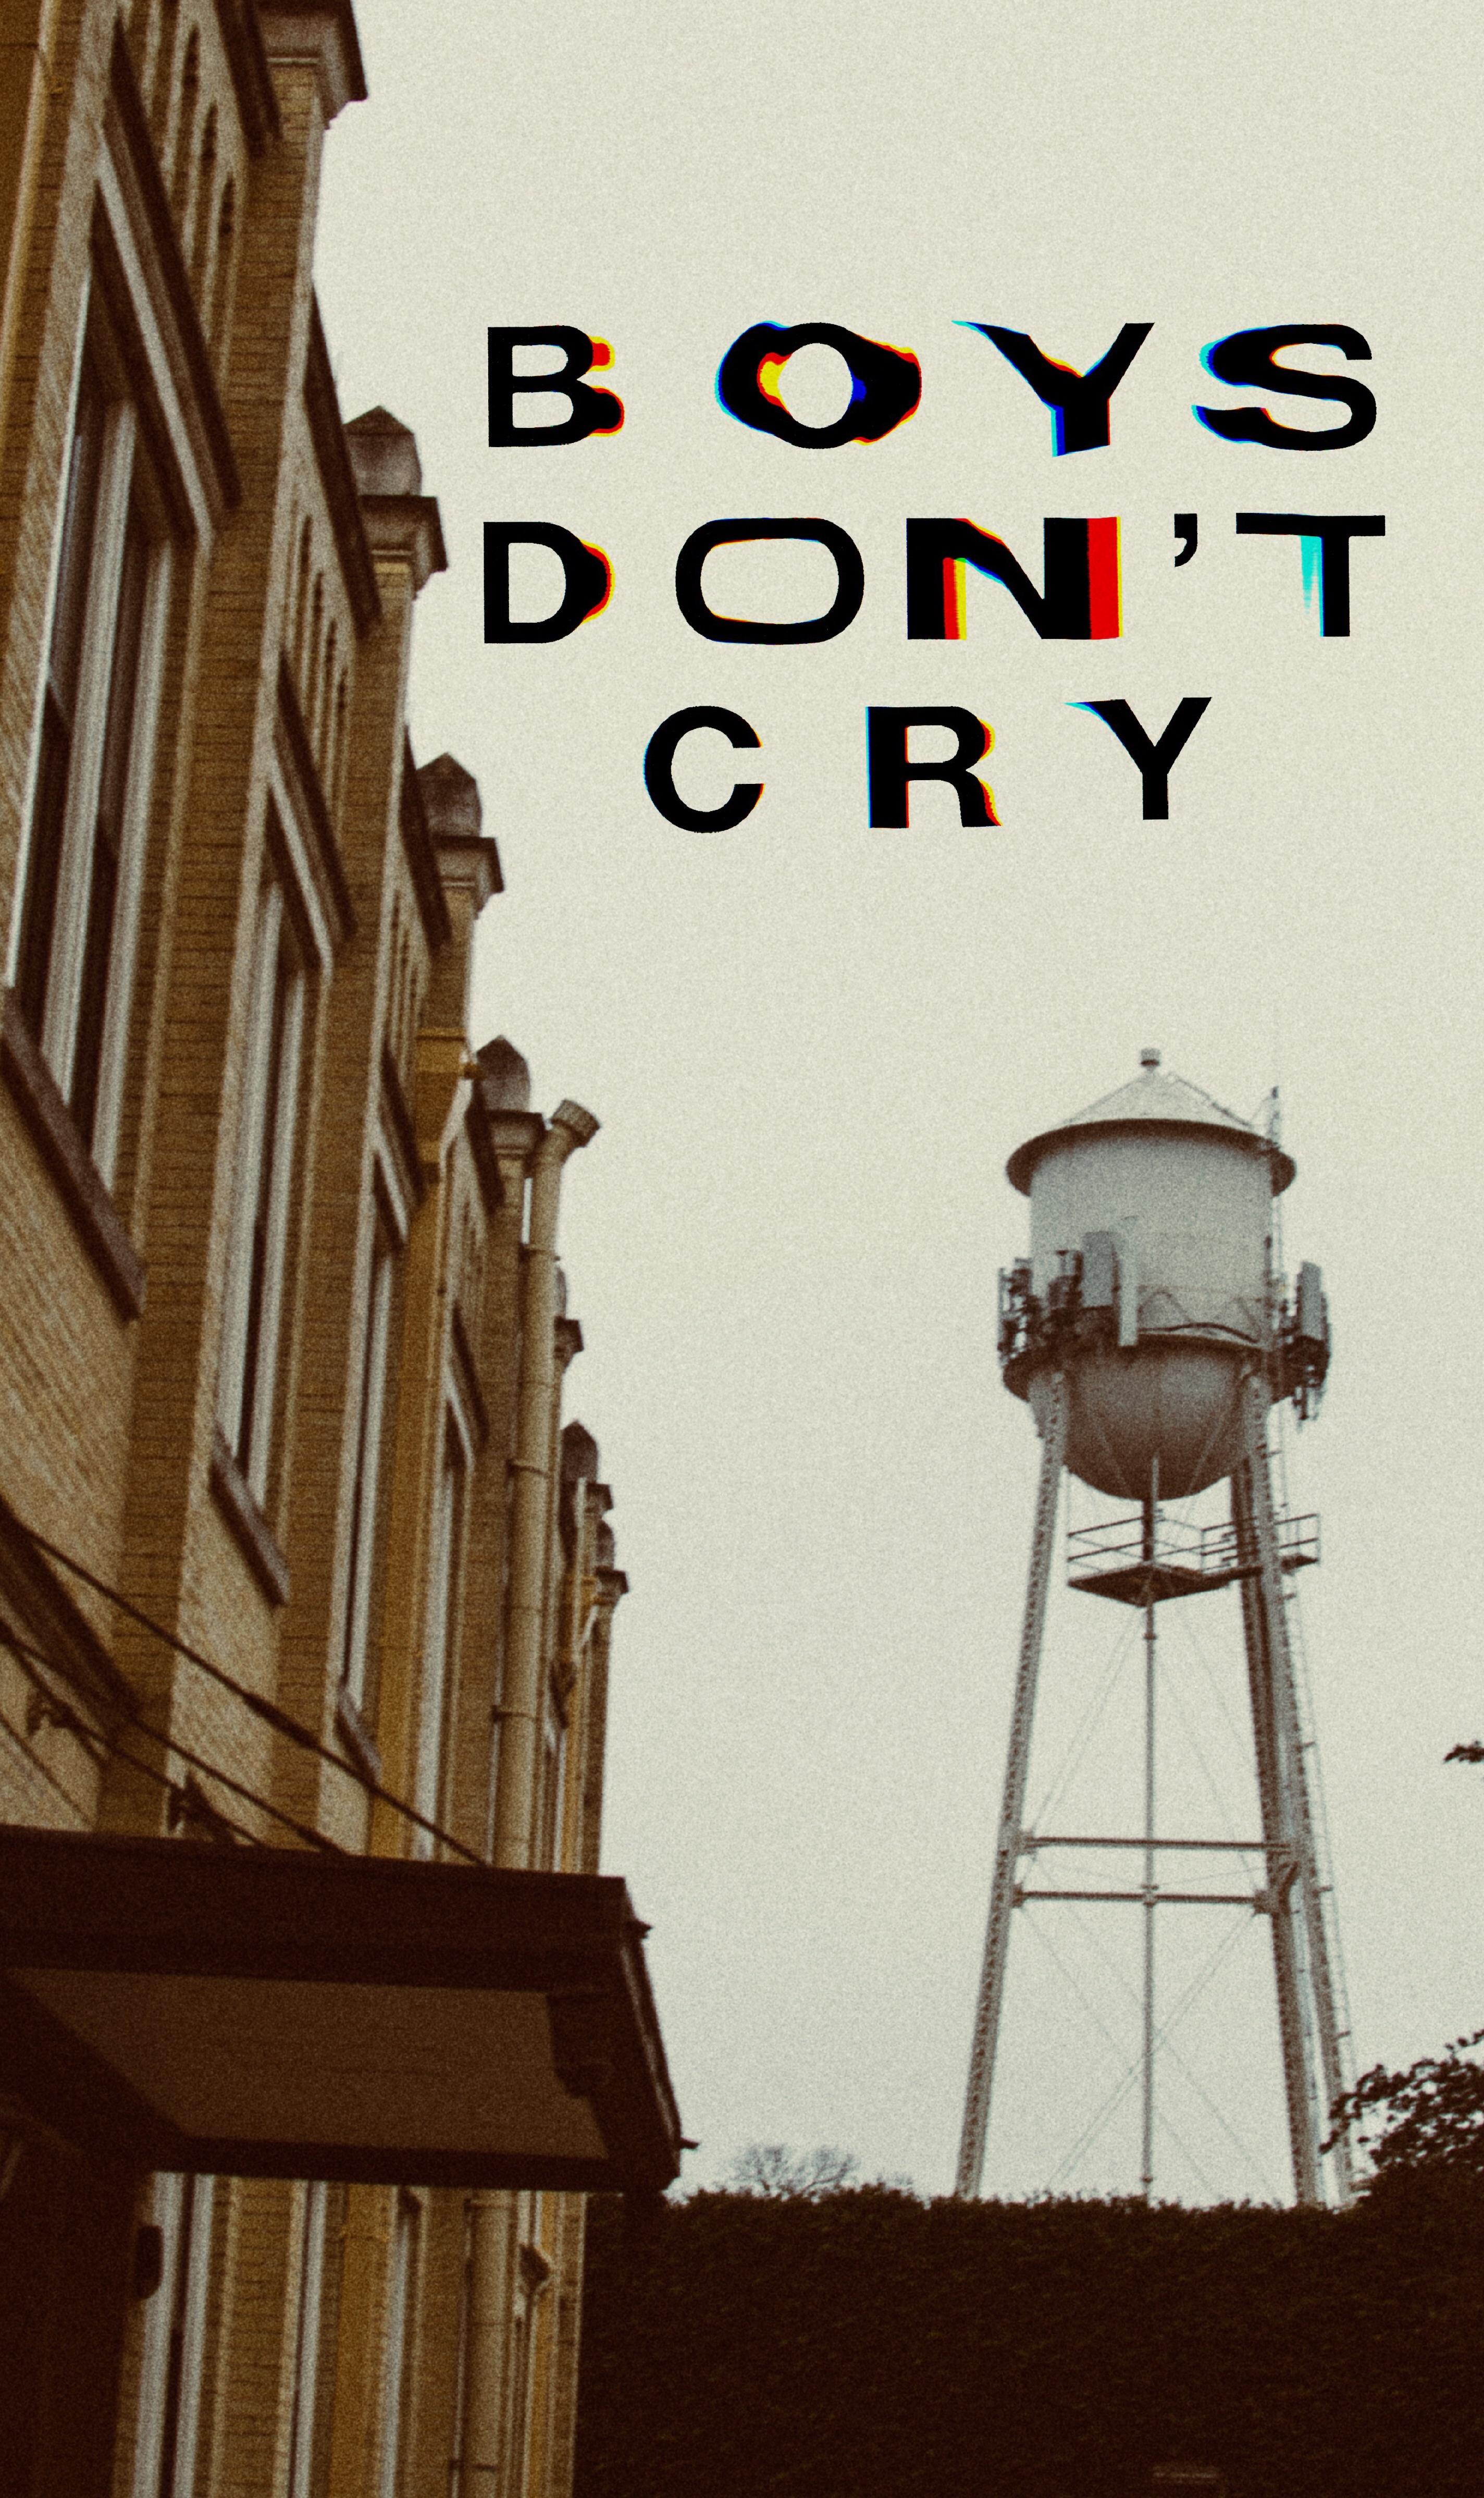 another boys don't cry wallpaper for da cult